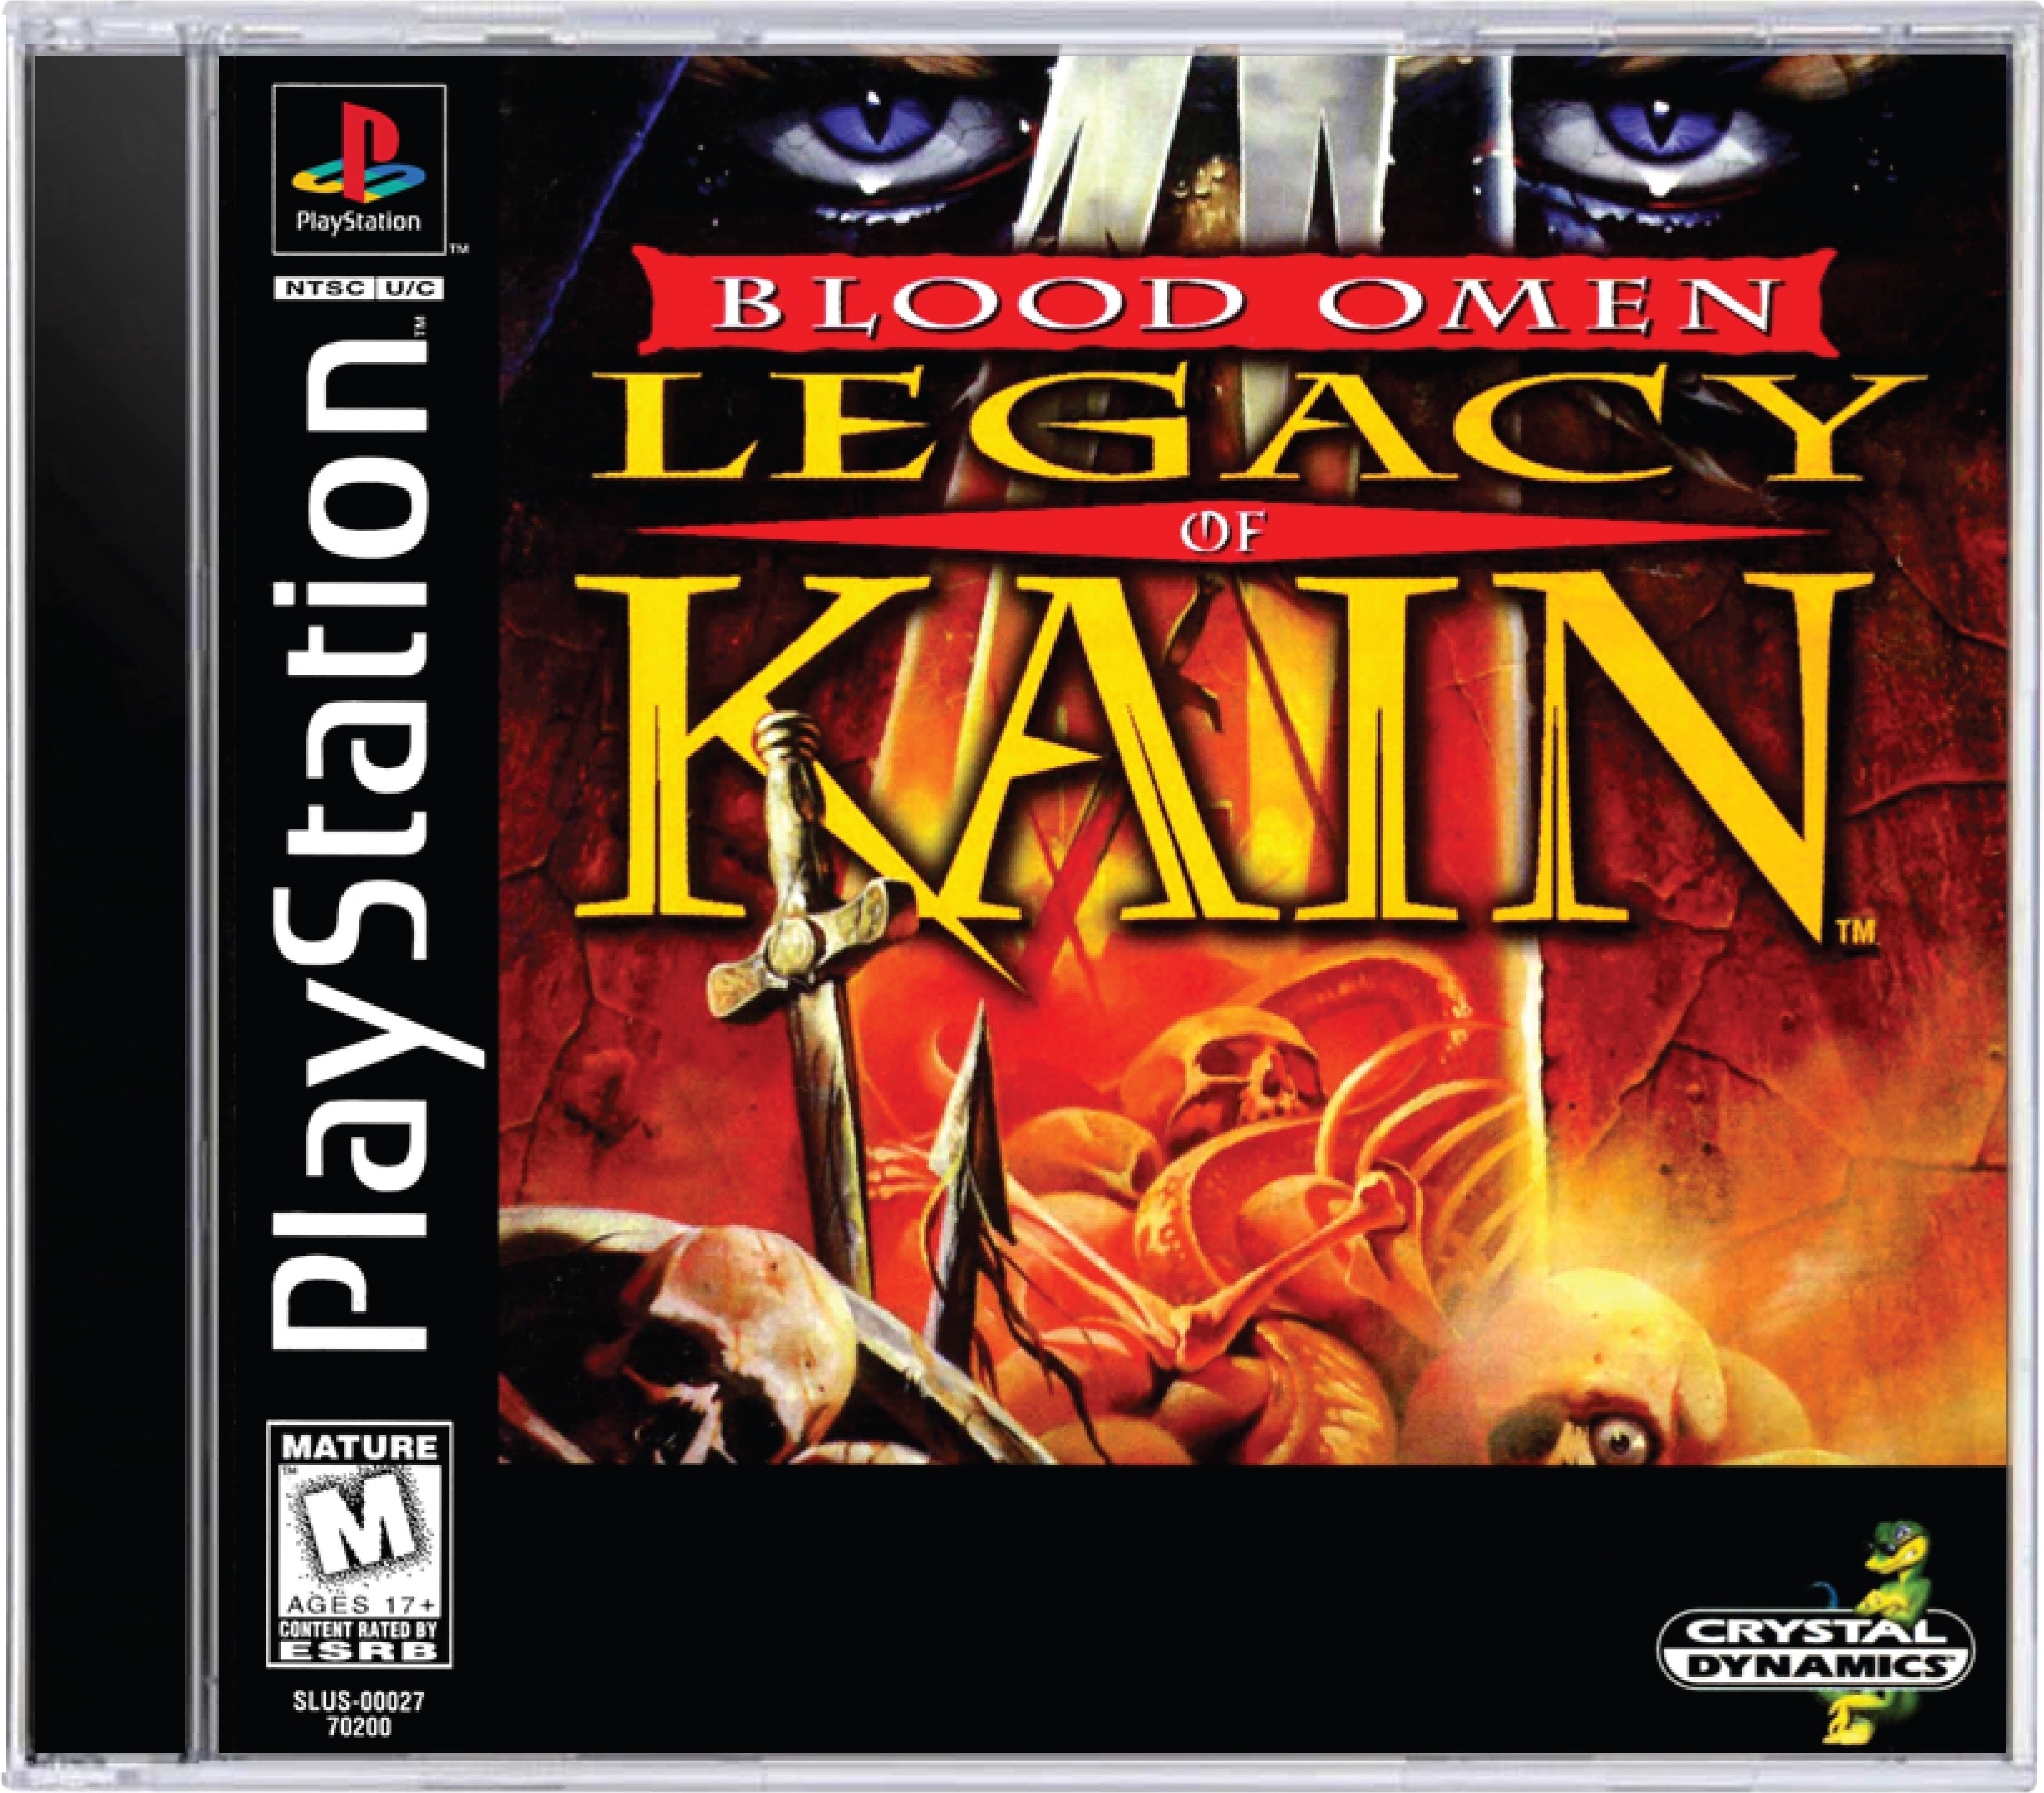 Blood Omen Legacy of Kain Cover Art and Product Photo